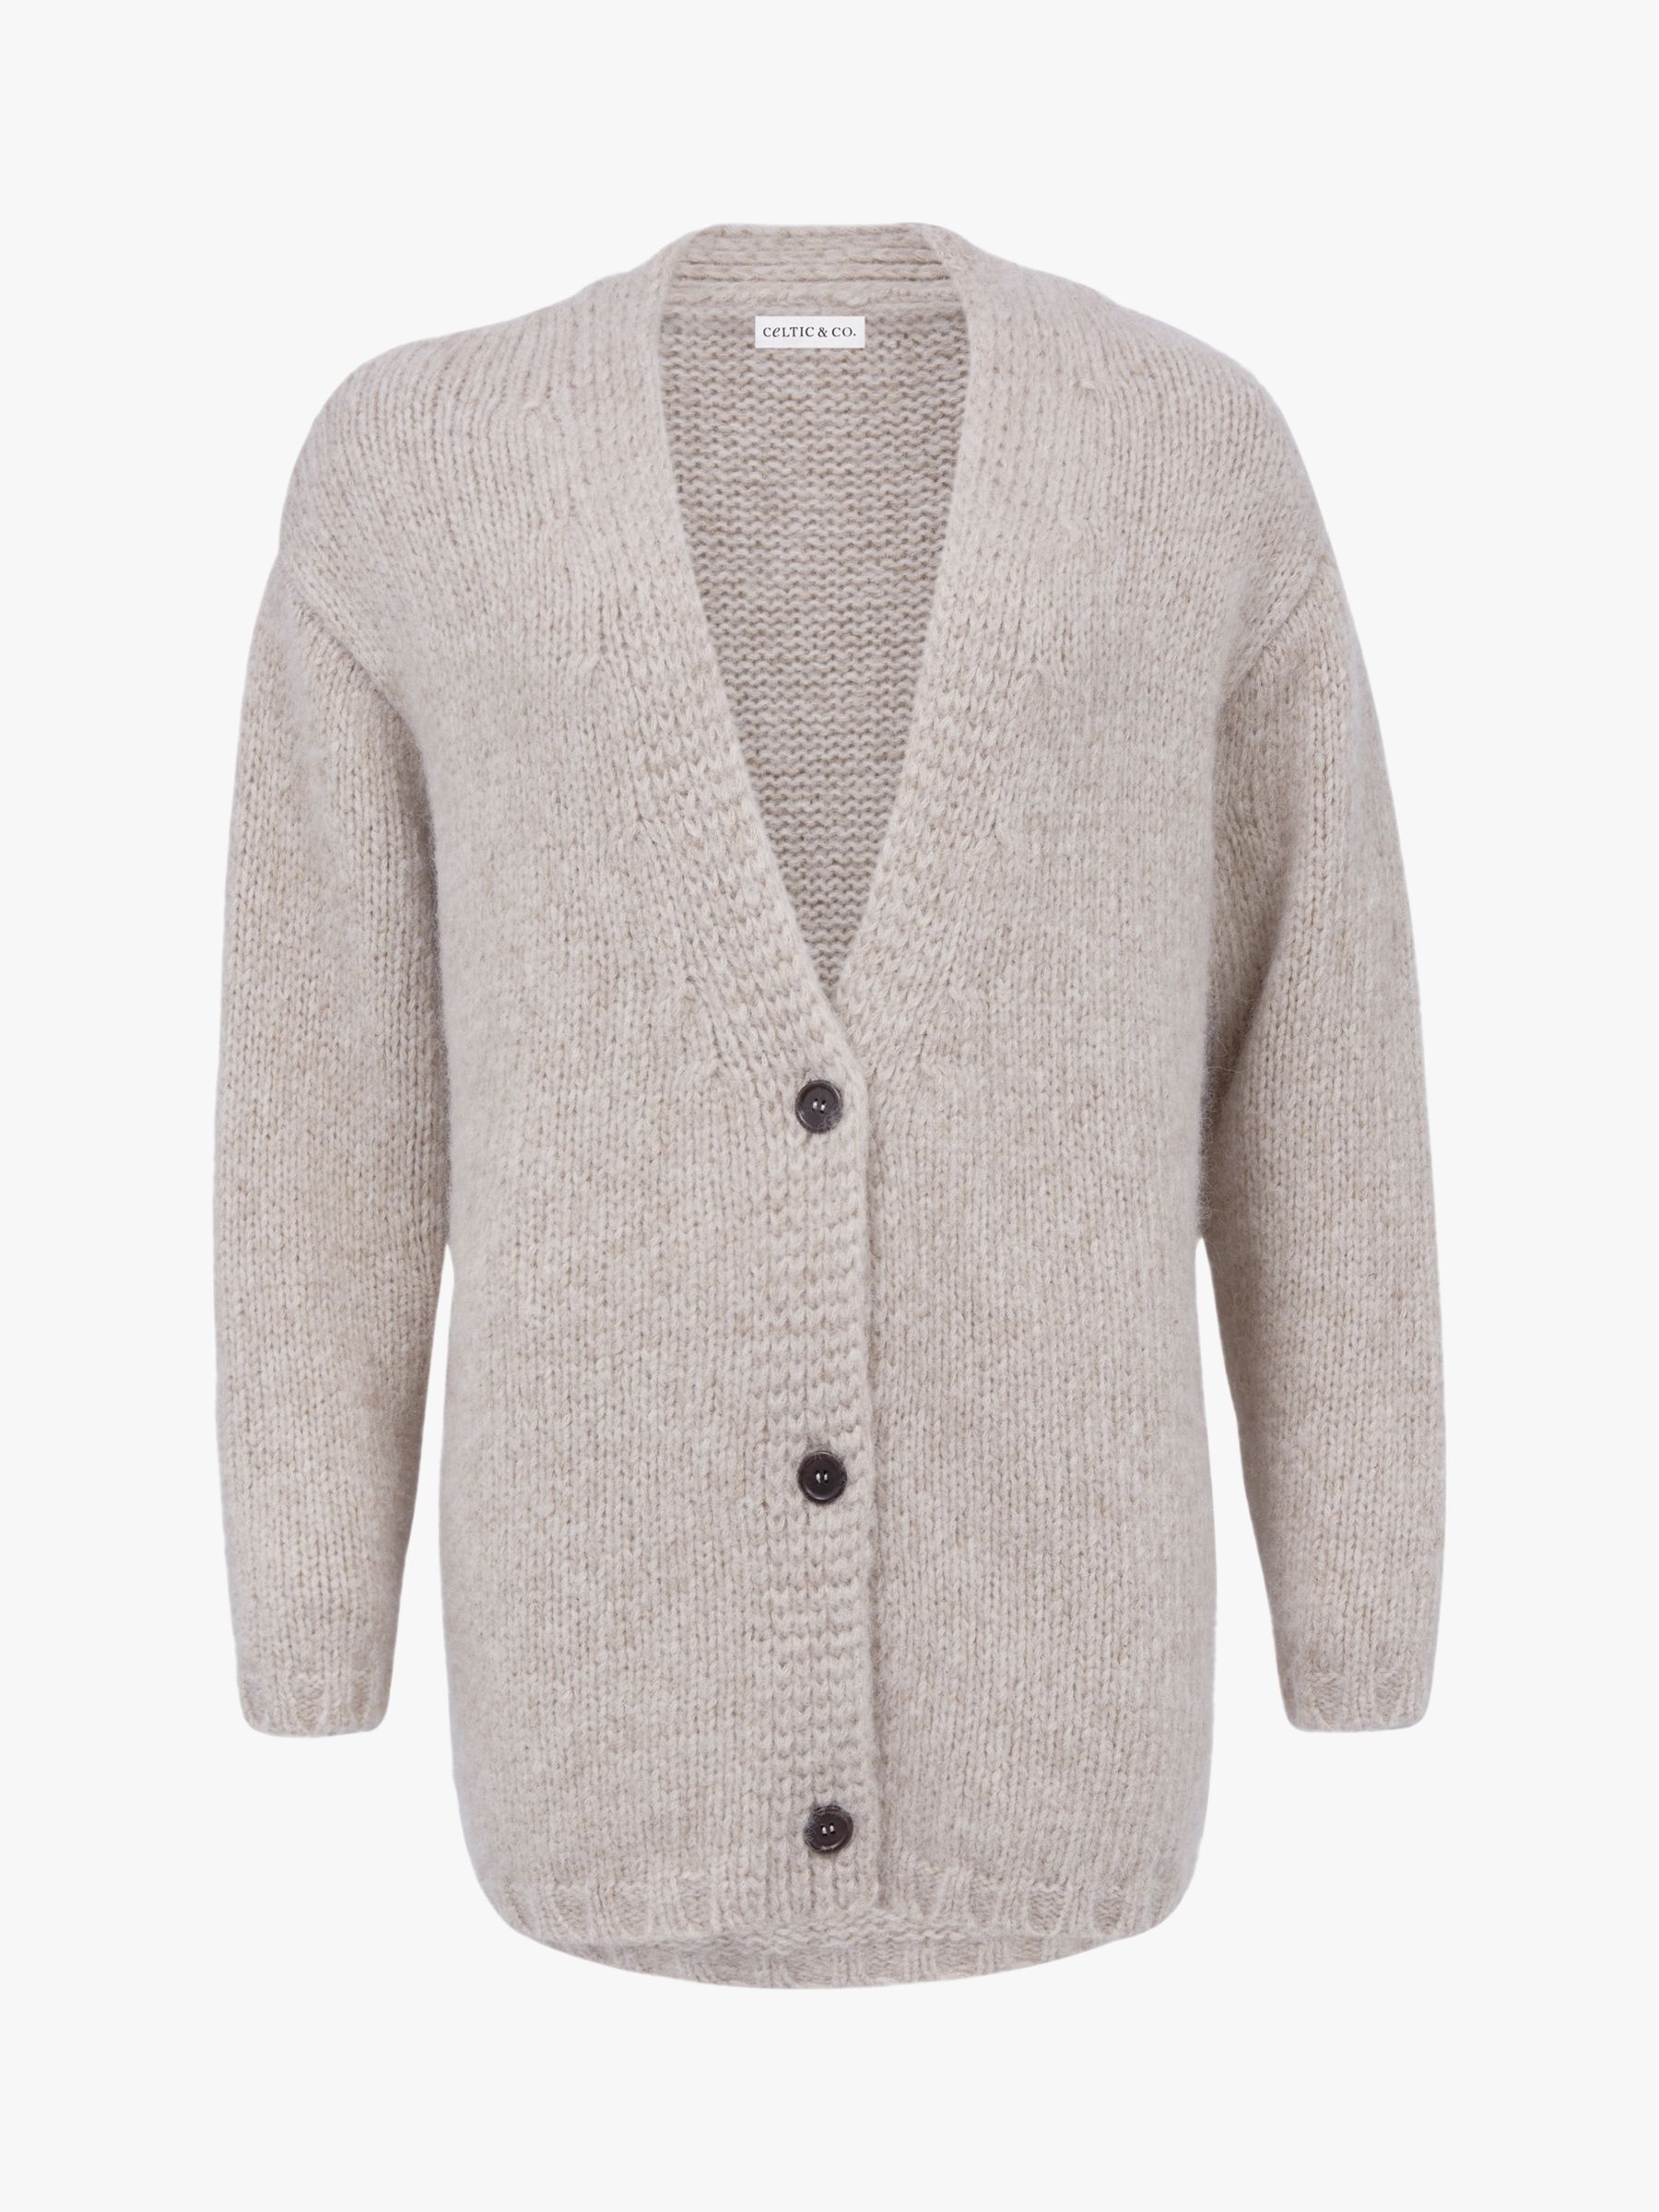 Celtic & Co. Luxe Wool Blend Slouch Cardigan, Oatmeal at John Lewis ...